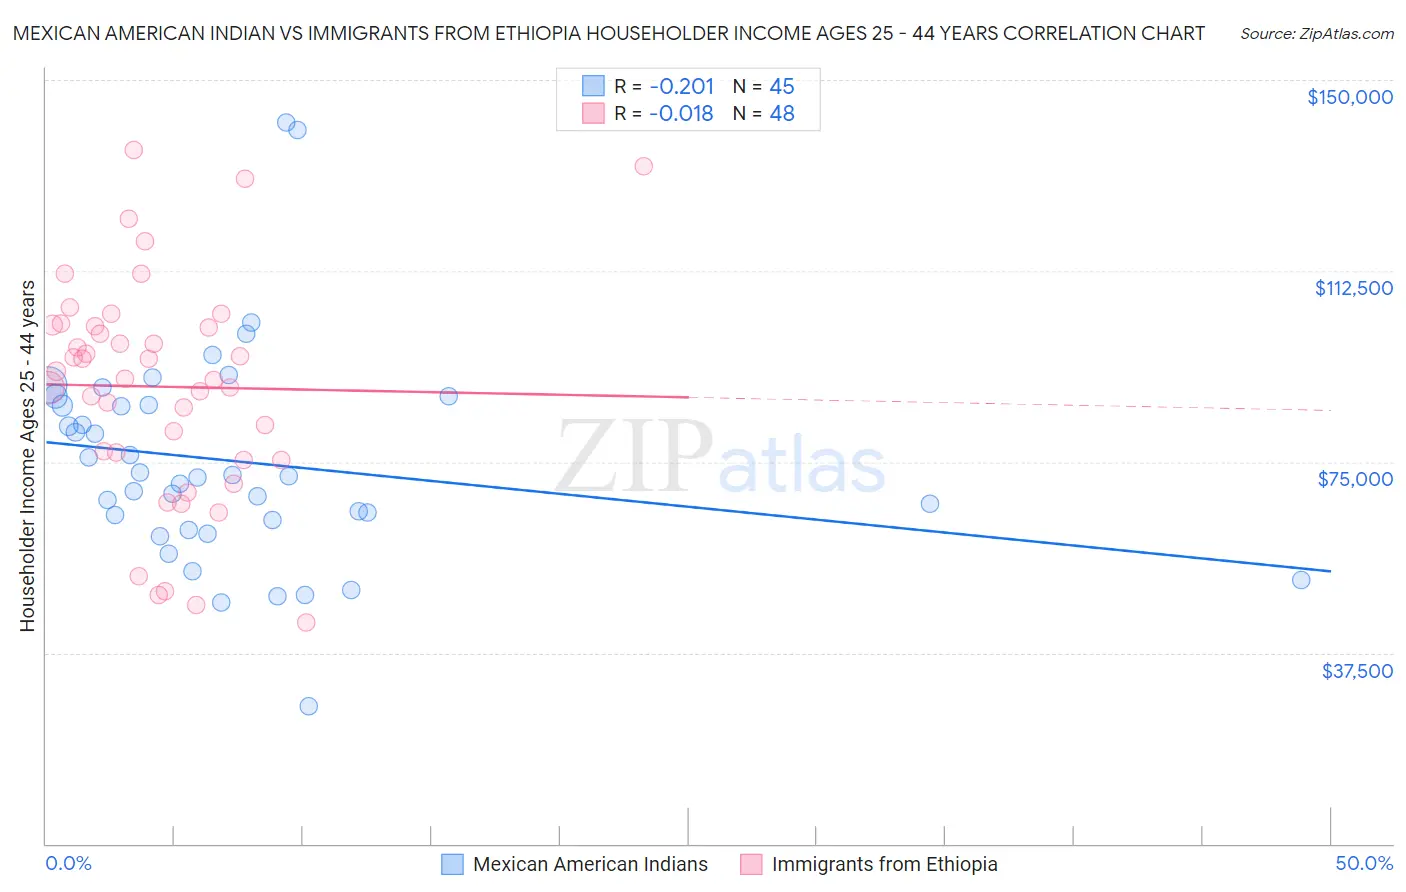 Mexican American Indian vs Immigrants from Ethiopia Householder Income Ages 25 - 44 years